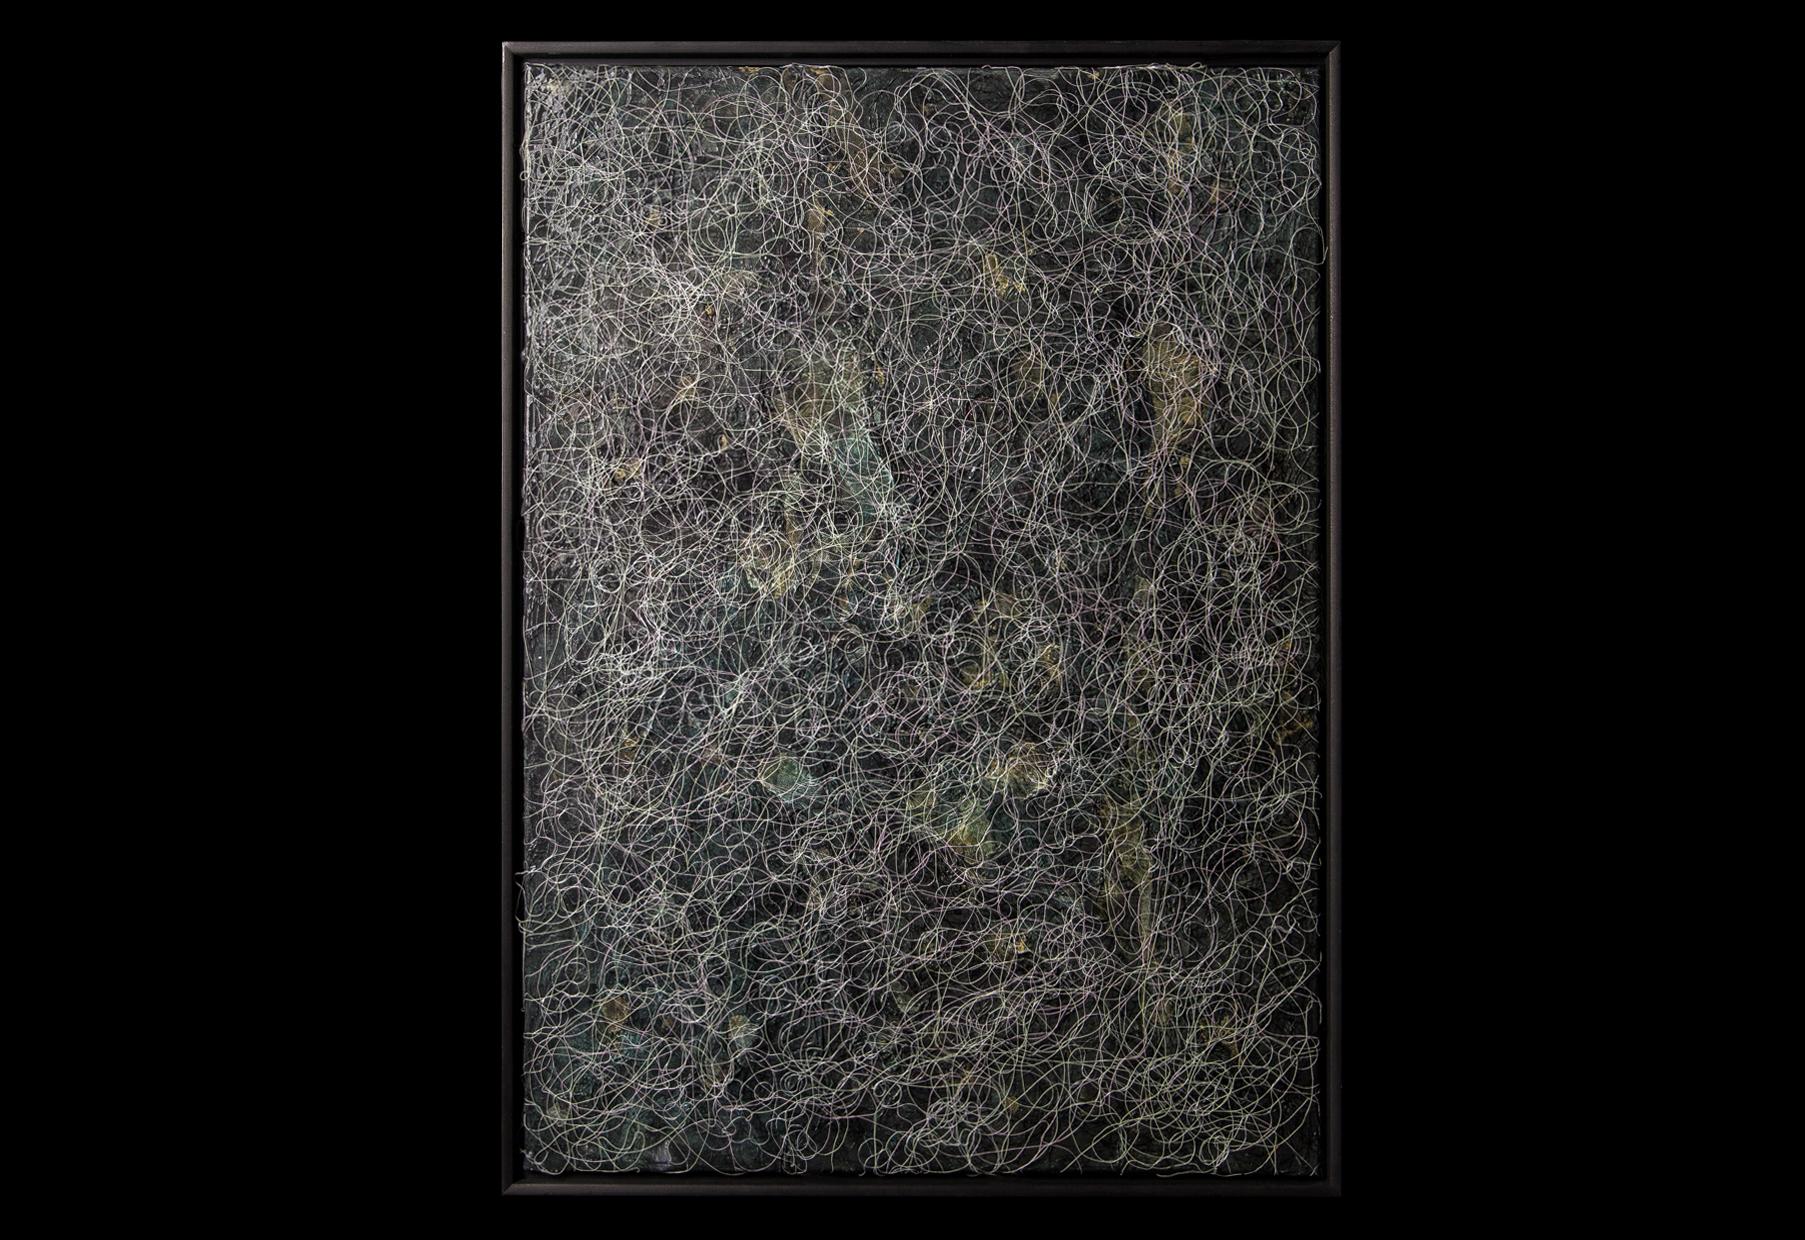 Mixed-media on canvas.

About the artist:
Born in Kumamoto, Naoki Kawano is a London and Paris based Japanese artist, drawn to the innovative use of delicate and sensitive materials which elicit a nuanced emotional response.